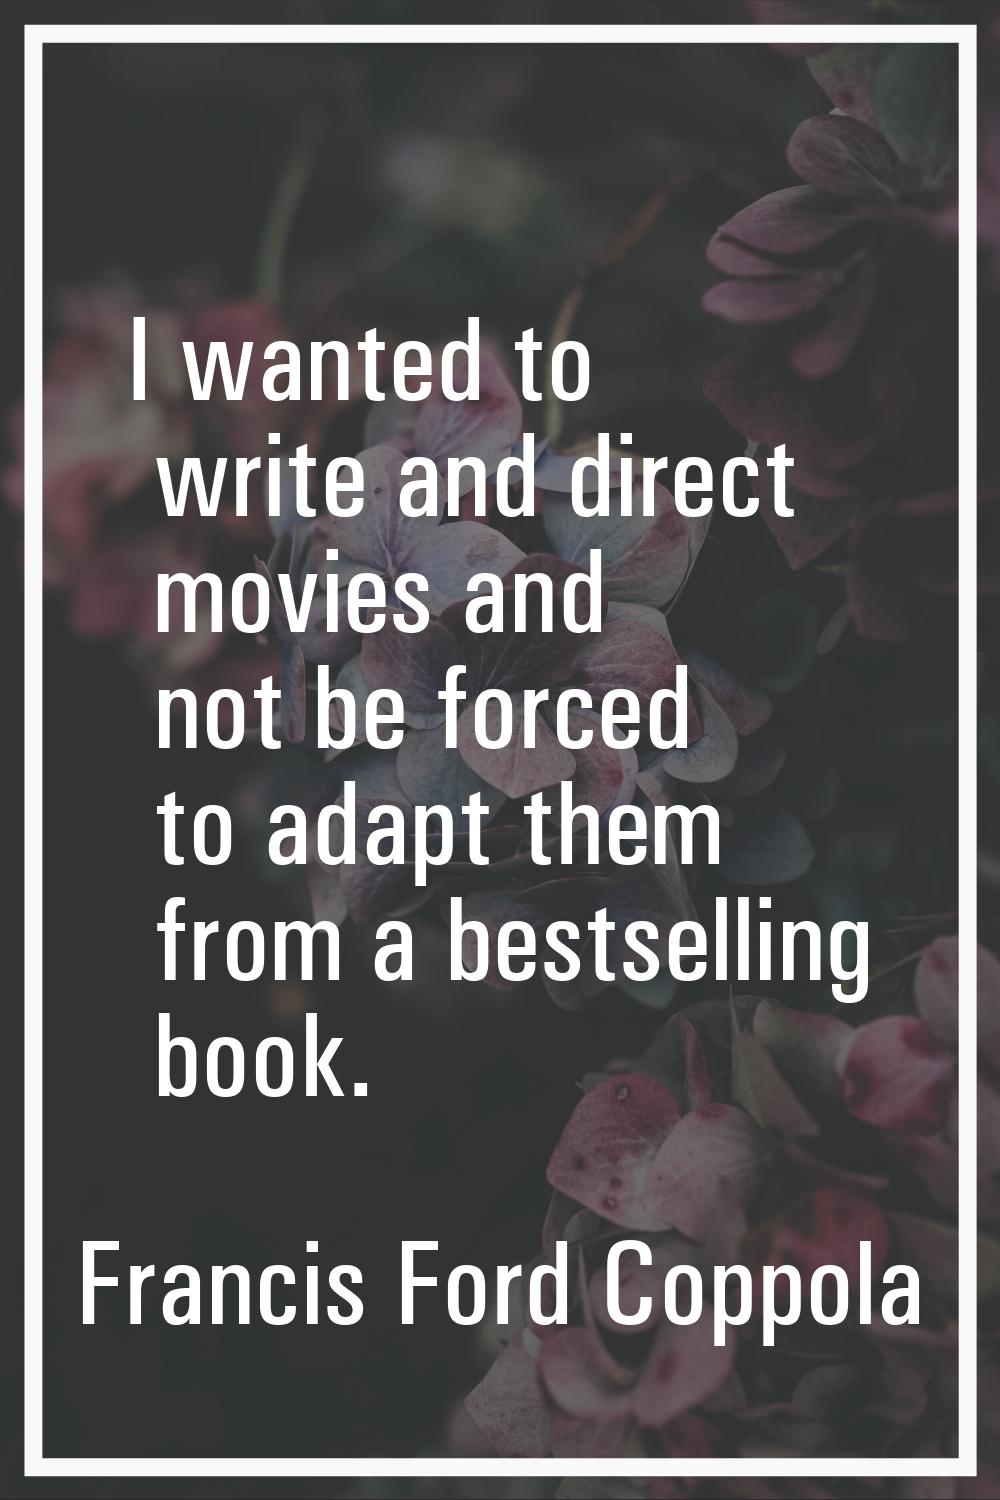 I wanted to write and direct movies and not be forced to adapt them from a bestselling book.